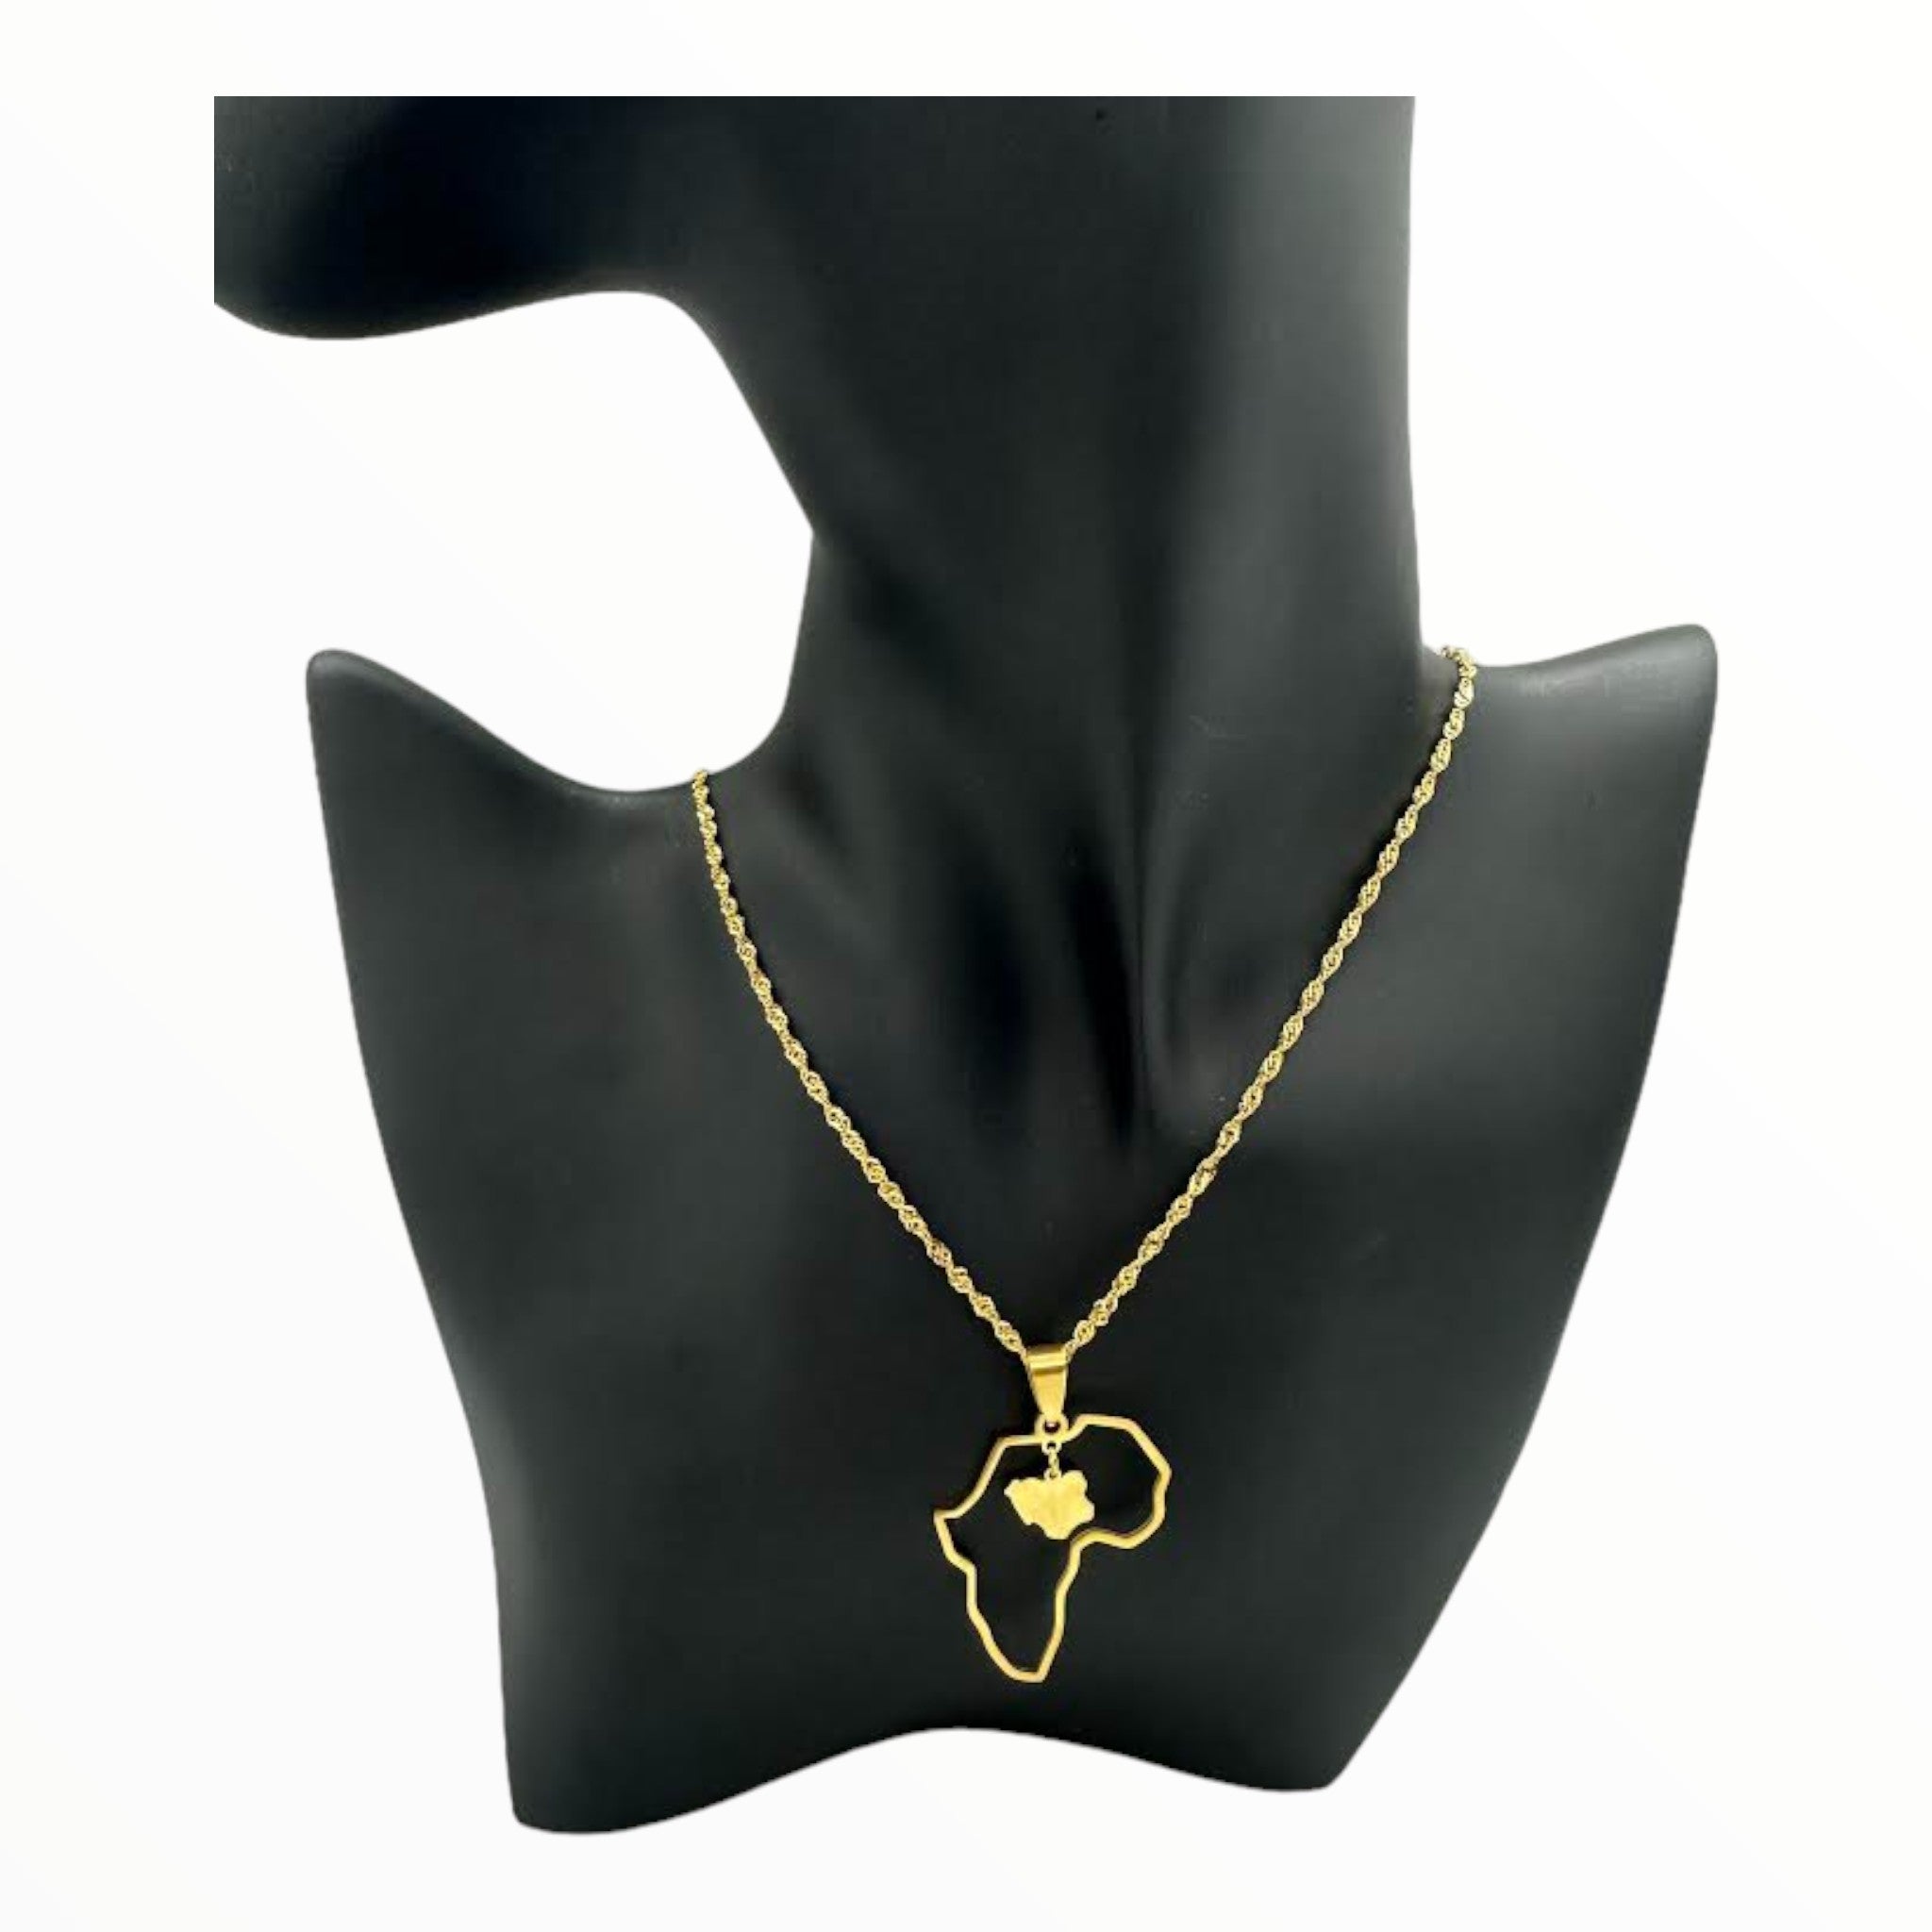 Africa Map Outlined With Nigeria Pendant Necklace (Gold)